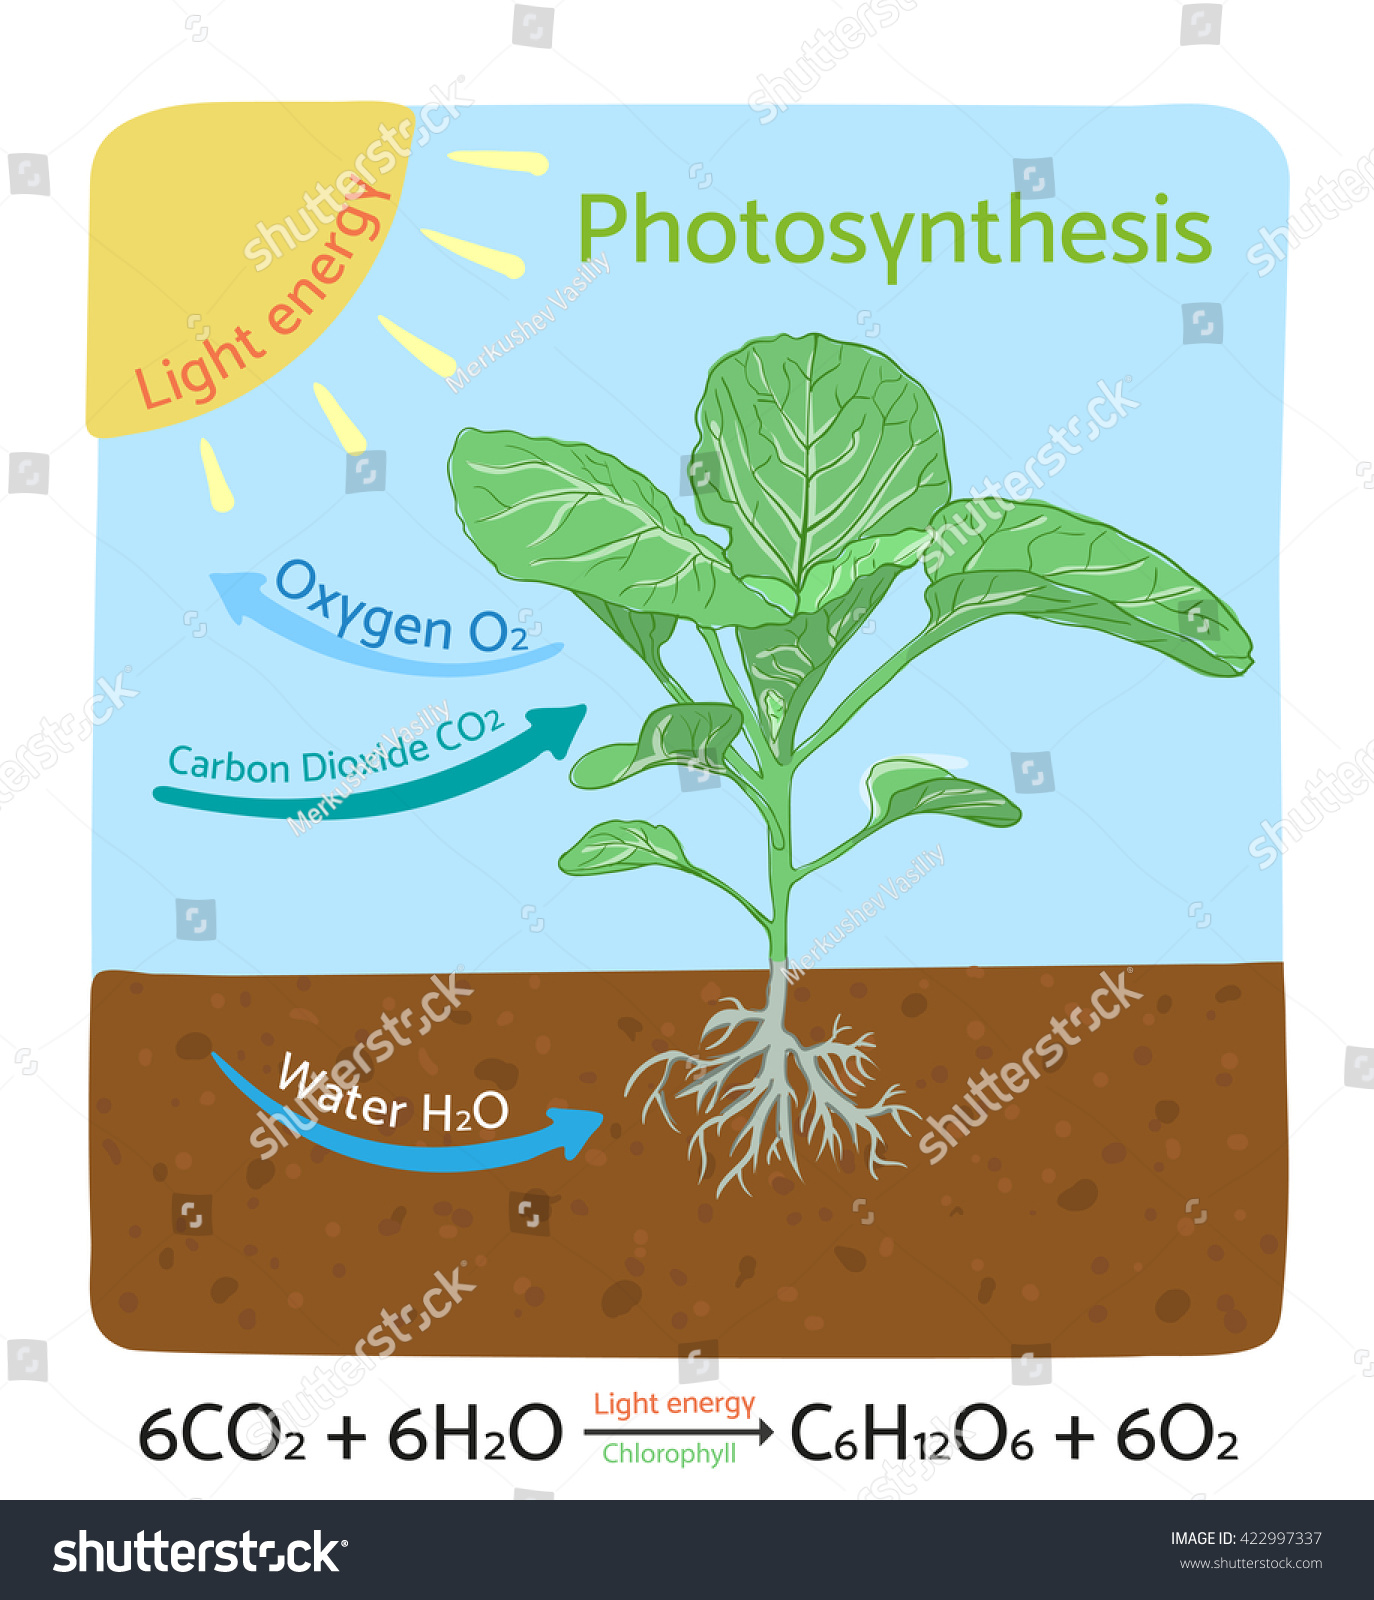 Photosynthesis Process Diagram Schematic Vector Illustration Stock ...